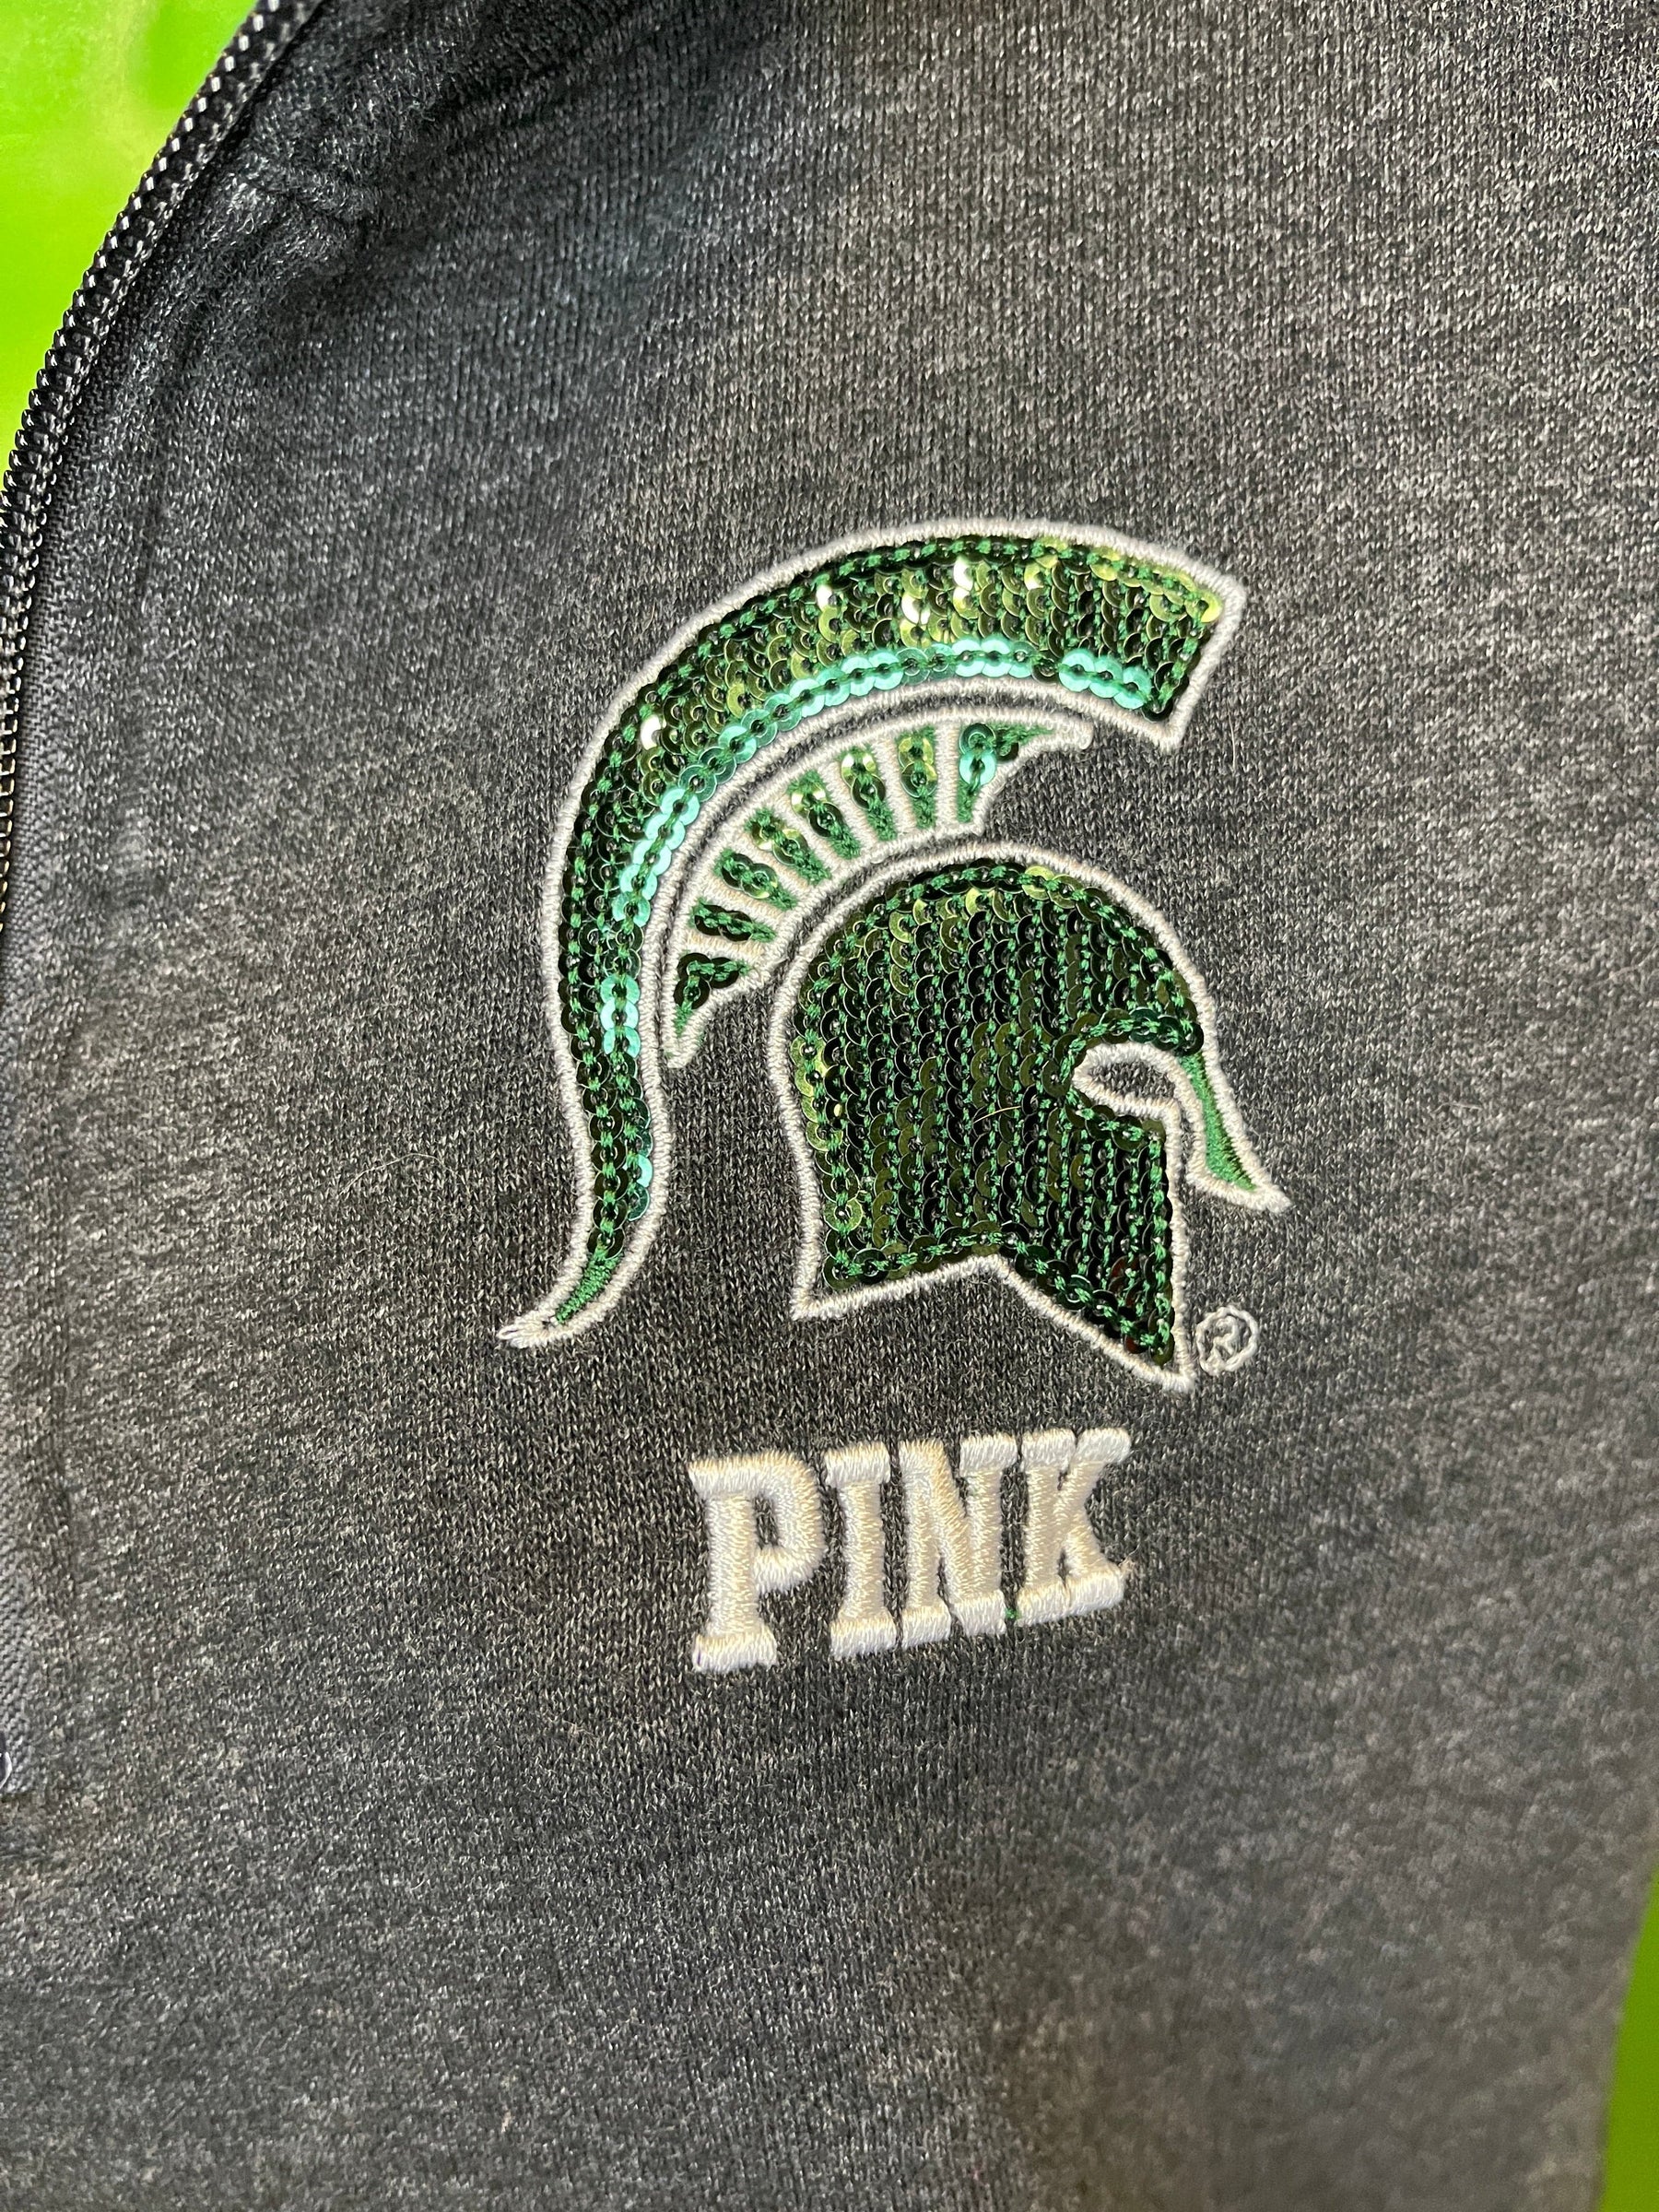 NCAA Michigan State Spartans PINK Sequin 1/4 Zip Pullover Women's Small